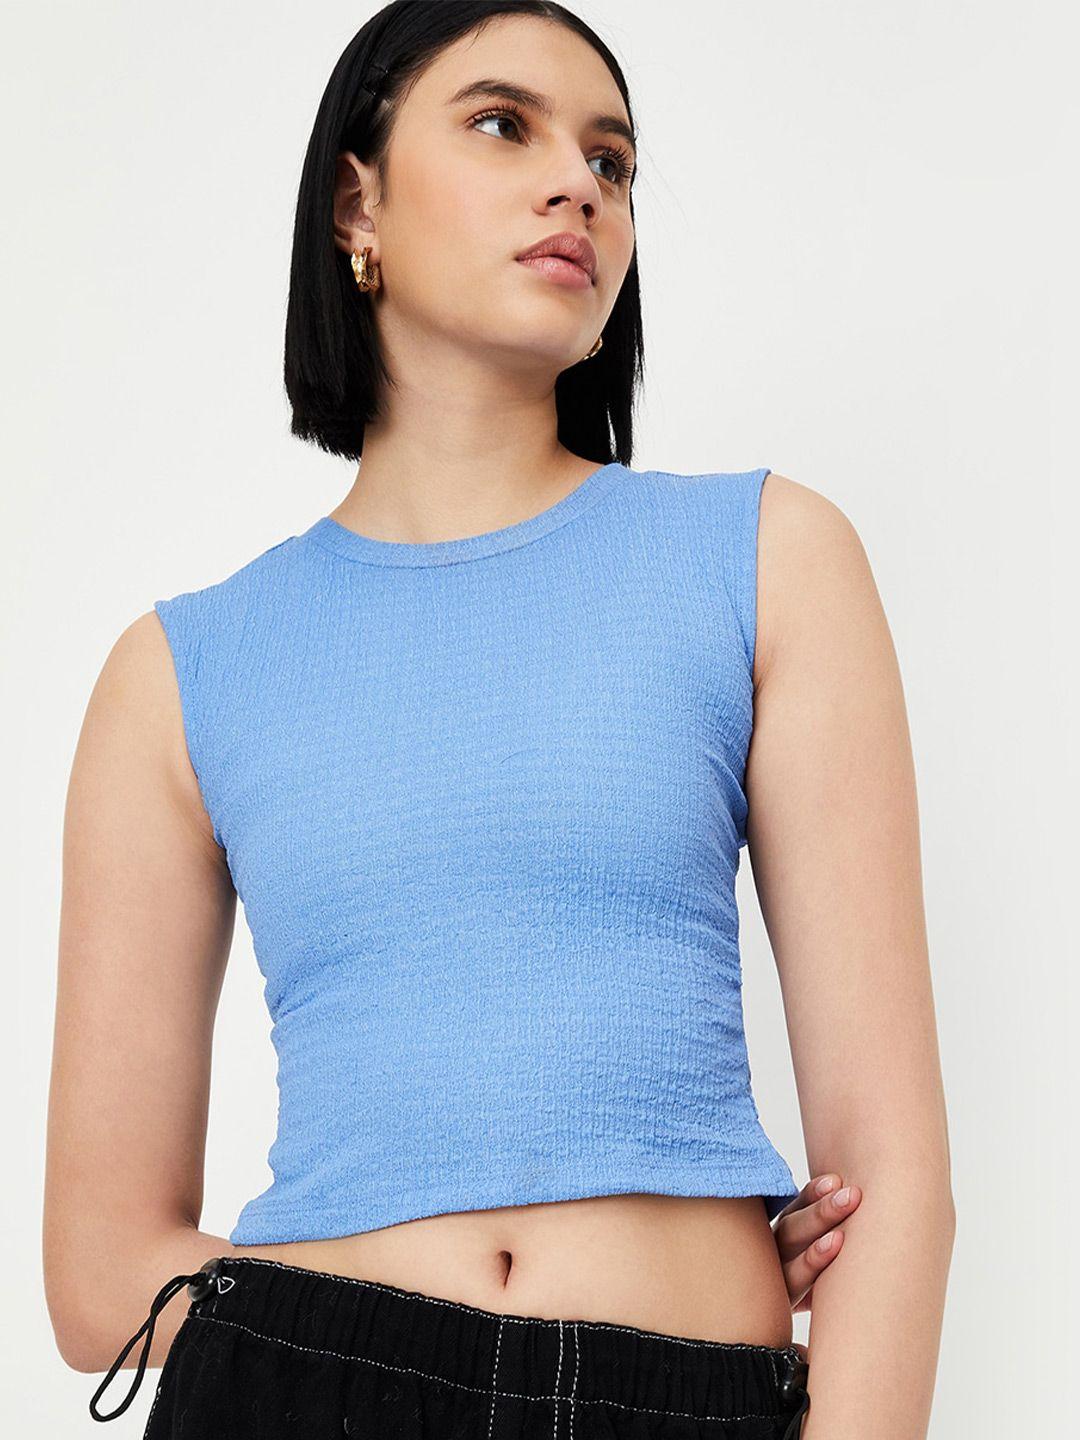 max-sleeveless-knitted-crop-top